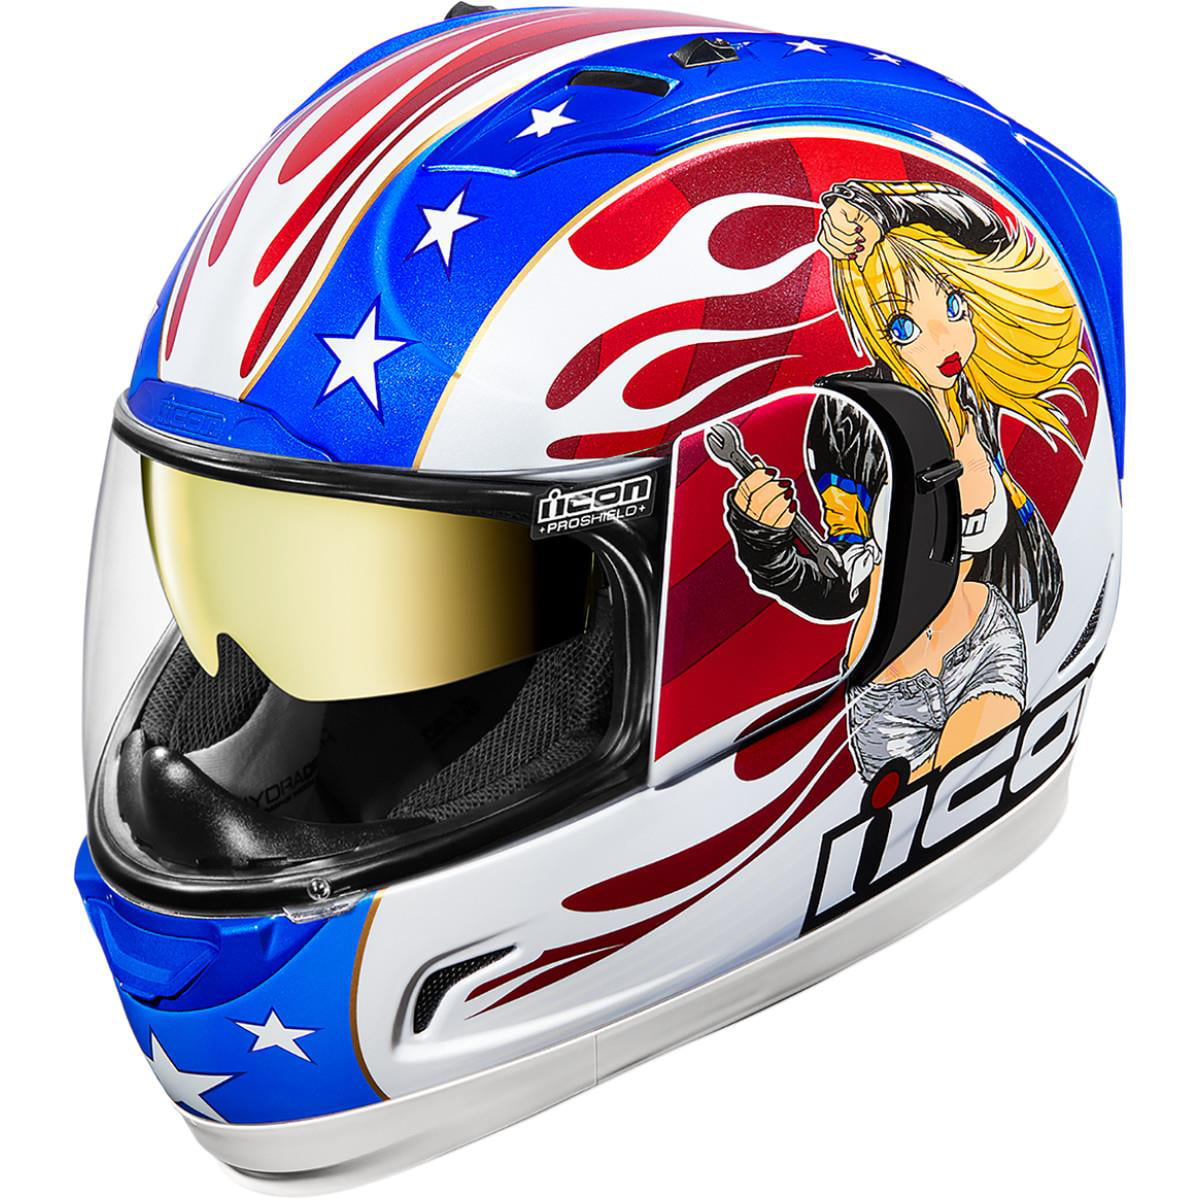 Icon Alliance GT Silver DL18 Fullface Motorcycle Street Racing Helmet CLOSEOUT 